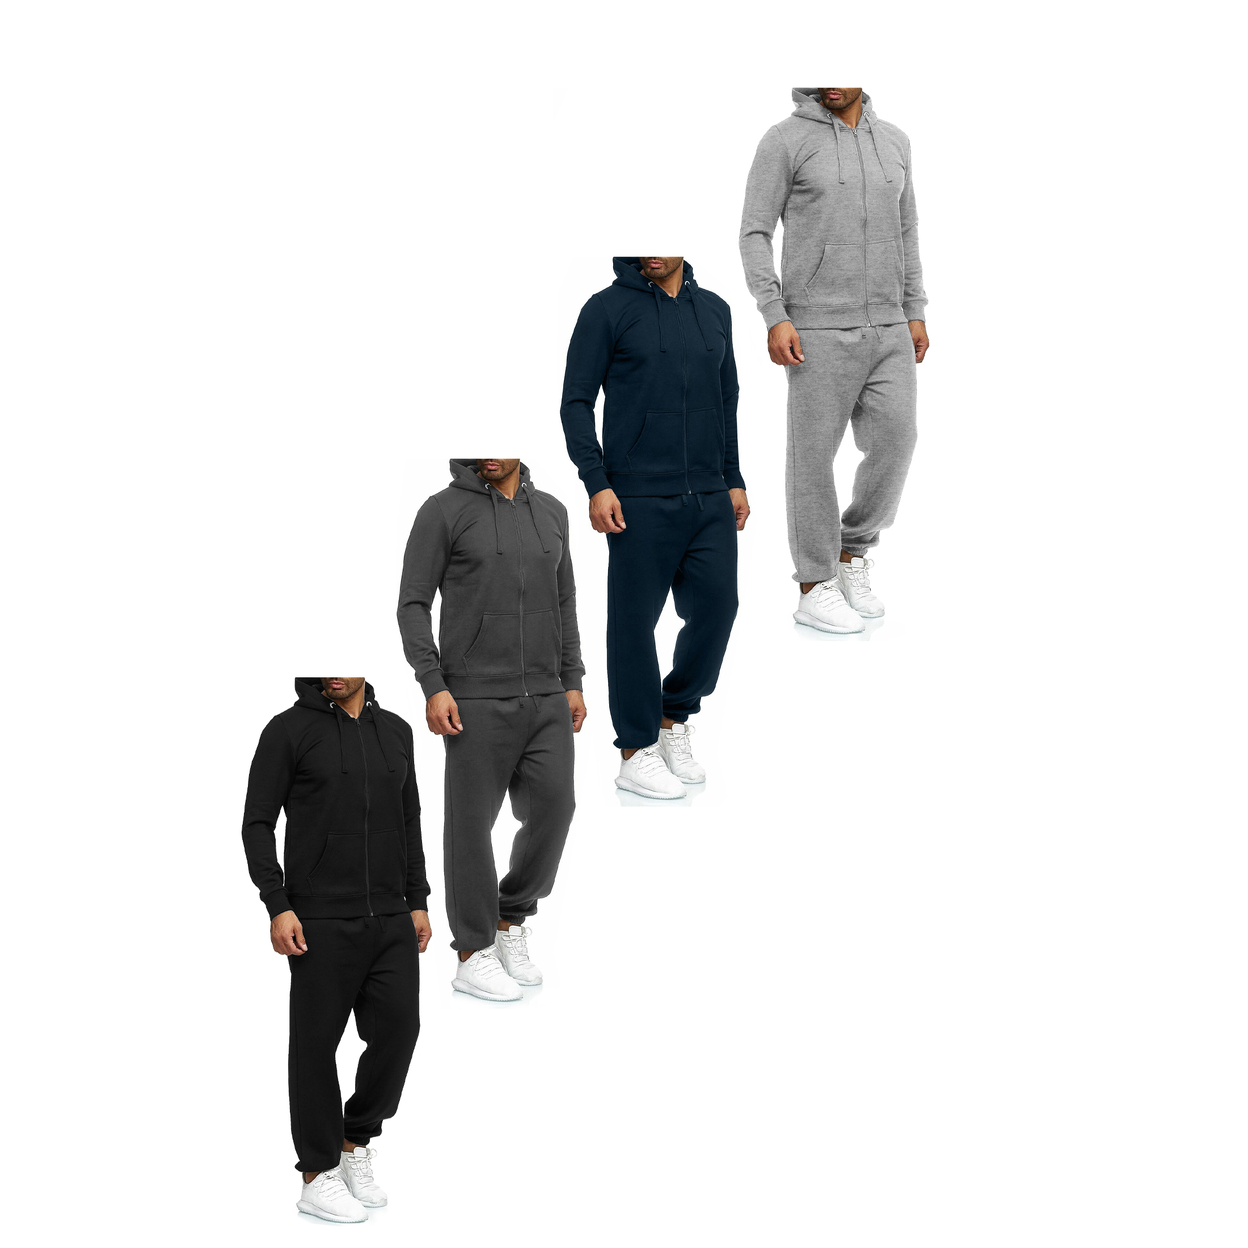 Multi-Pack: Men's Casual Big & Tall Athletic Active Winter Warm Fleece Lined Full Zip Tracksuit Jogger Set - Grey, 1-pack, Xx-large